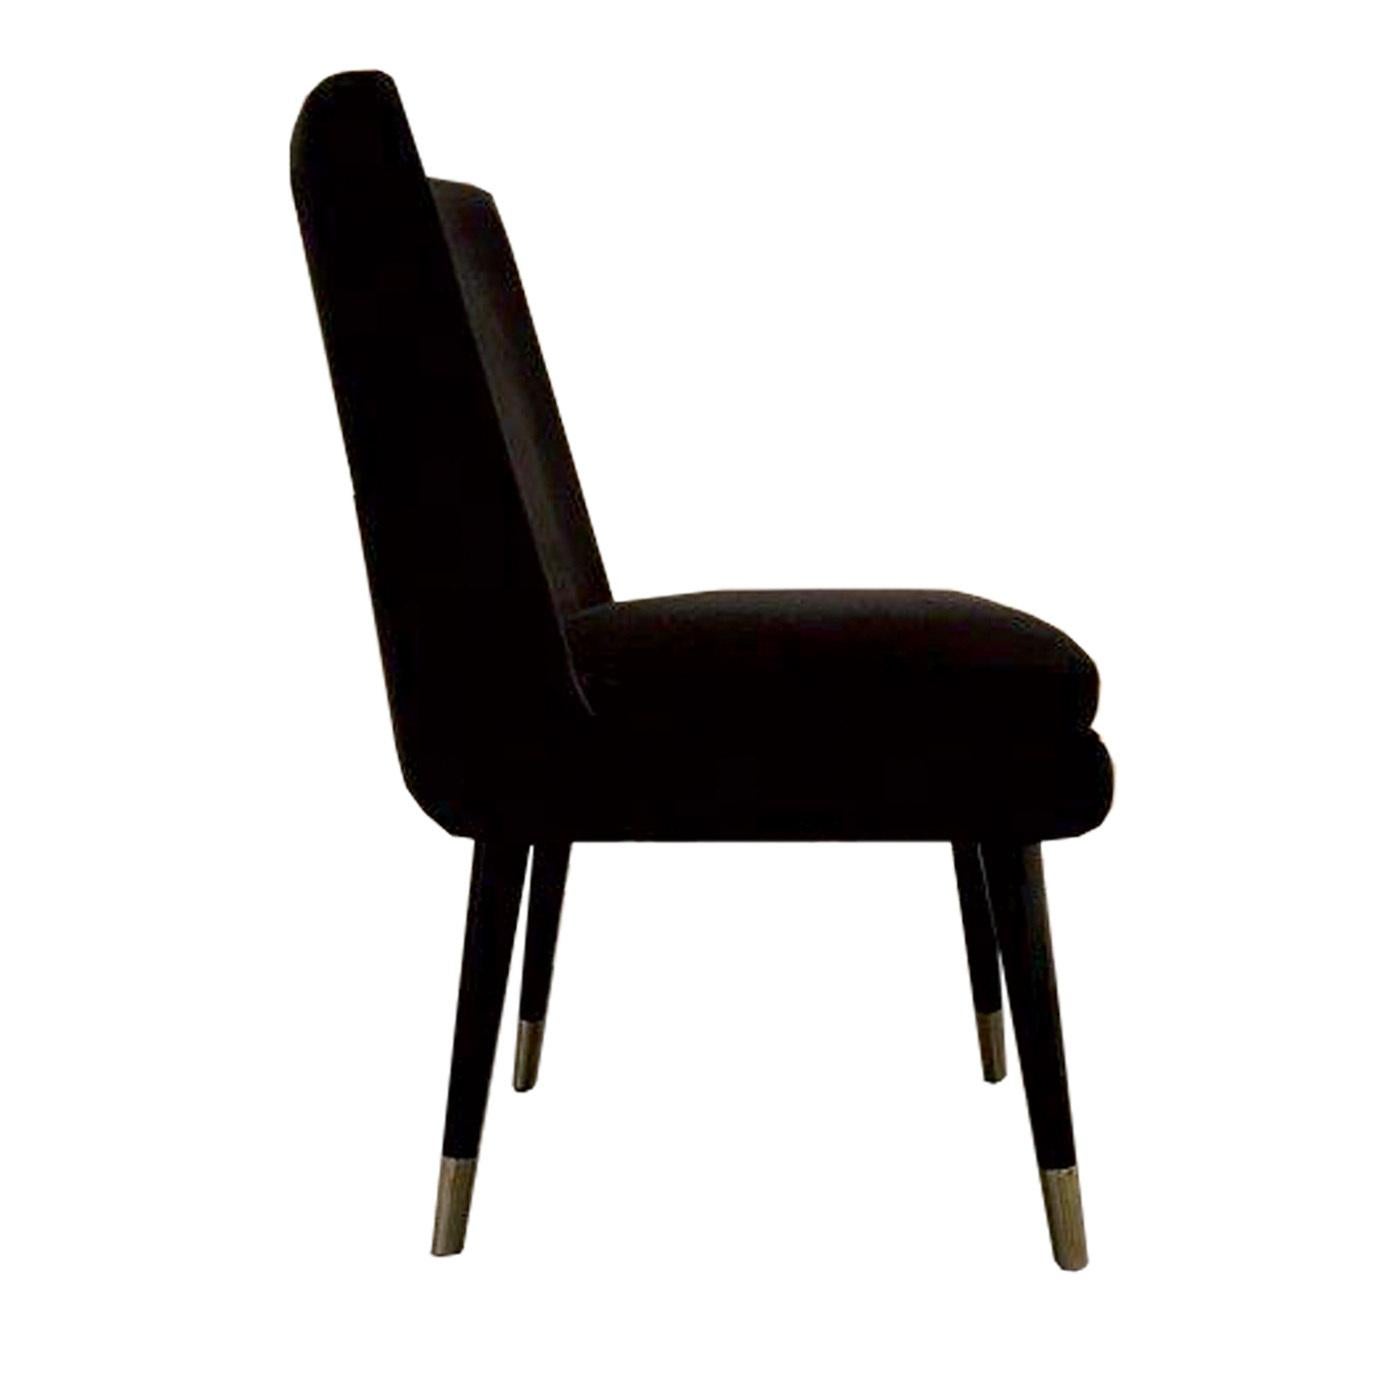 Sophisticated and inspired by the timeless grace of midcentury decor, this dining chair can also be displayed as an accent piece in an entryway or used behind a desk in the study. Its elegant and feminine silhouette is made of wood with black glossy